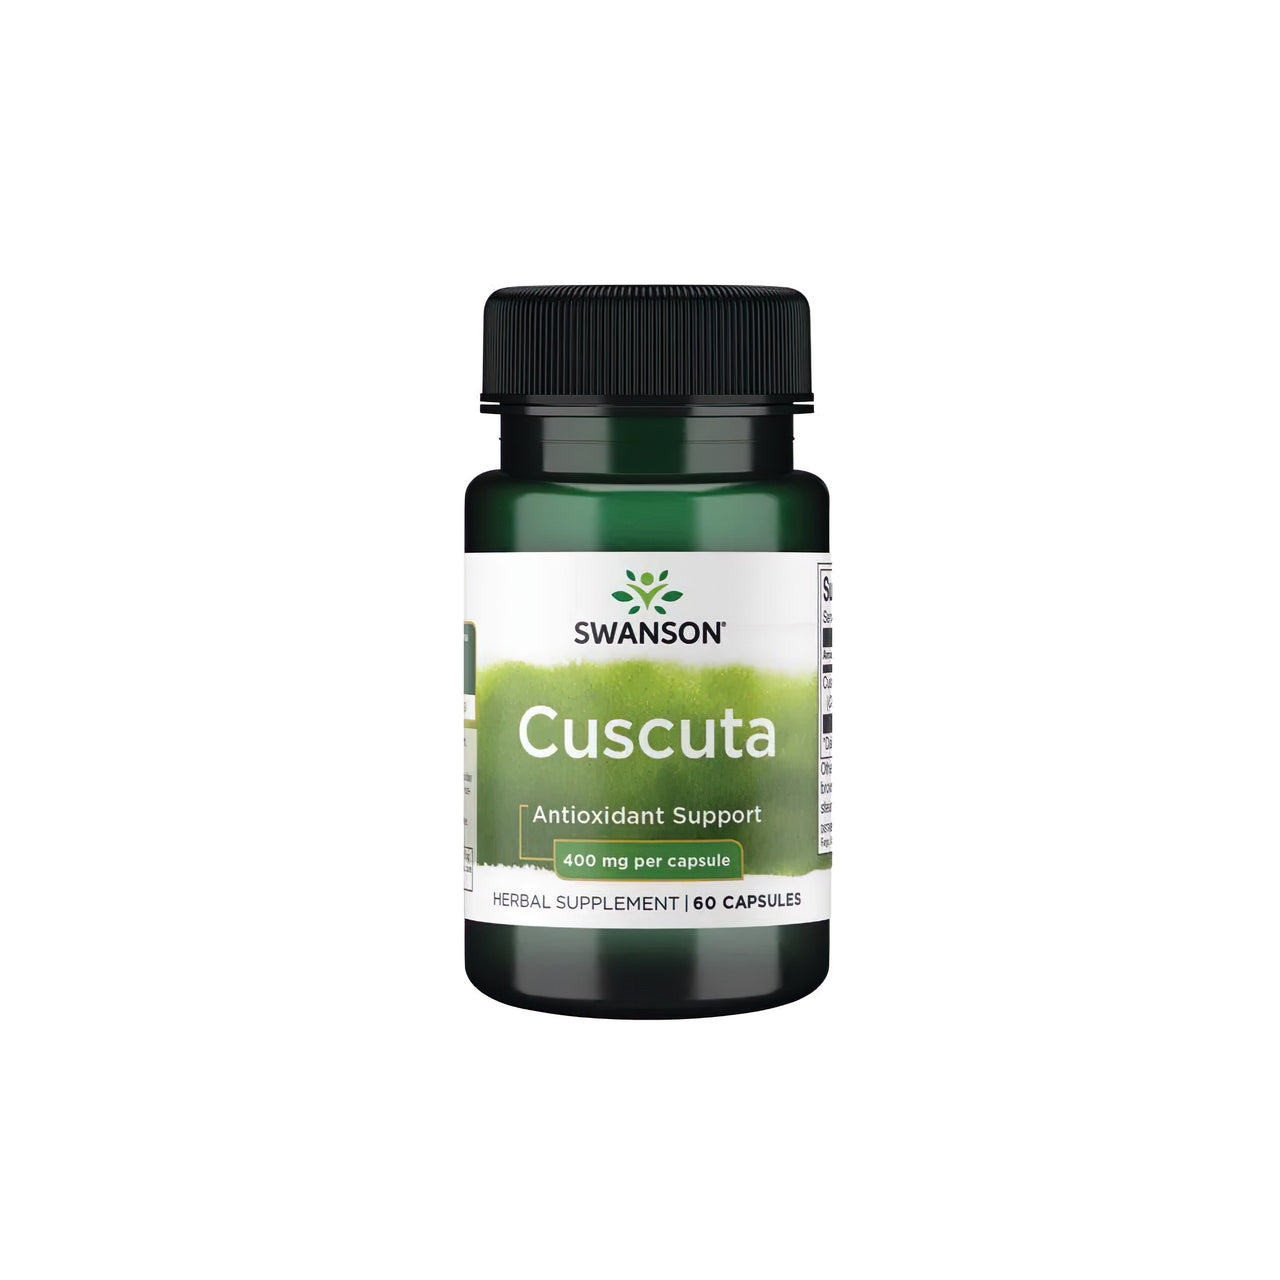 A bottle of Swanson Cuscuta 400 mg 60 capsules on a white background.